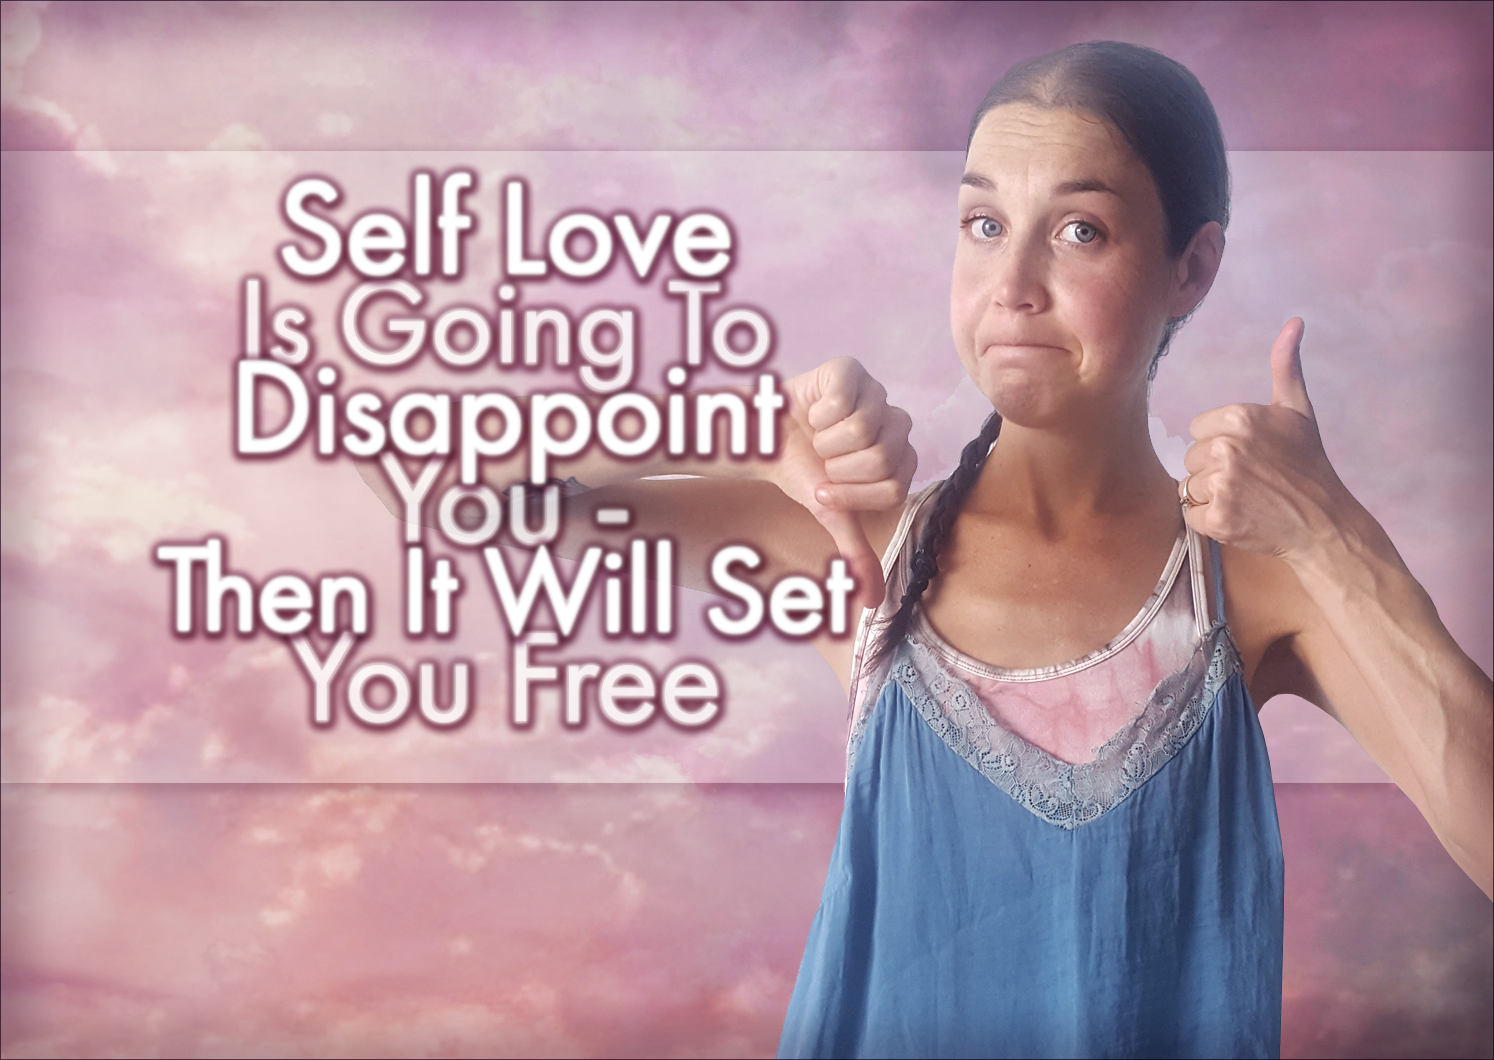 Self Love Will Disappoint You – Then It Will Set You Free